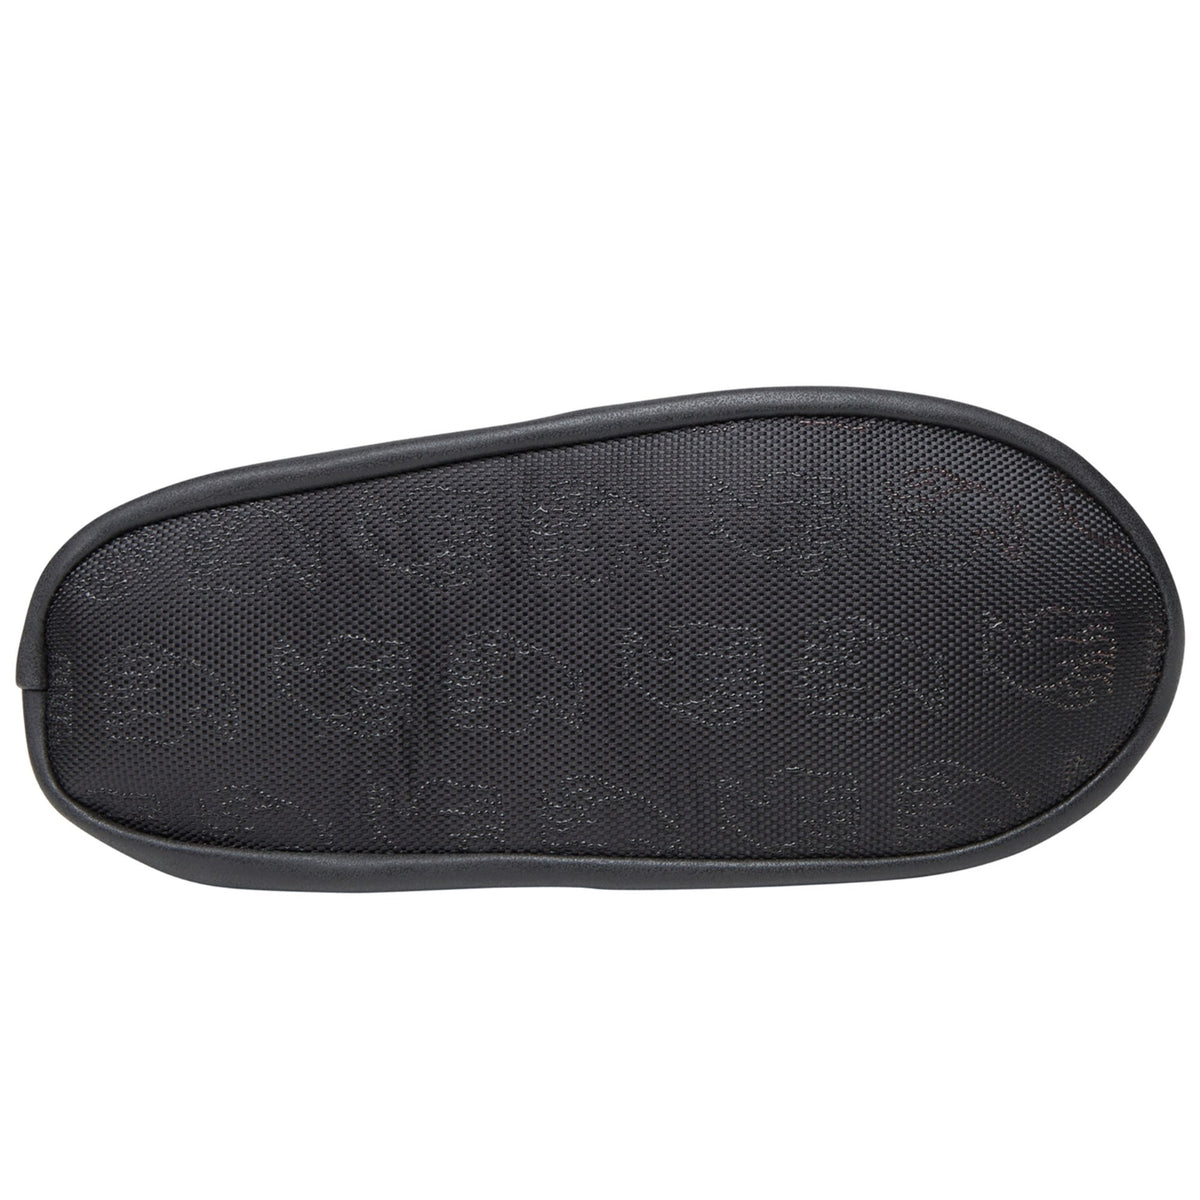 Nordisk Mos Down Slippers sole unit